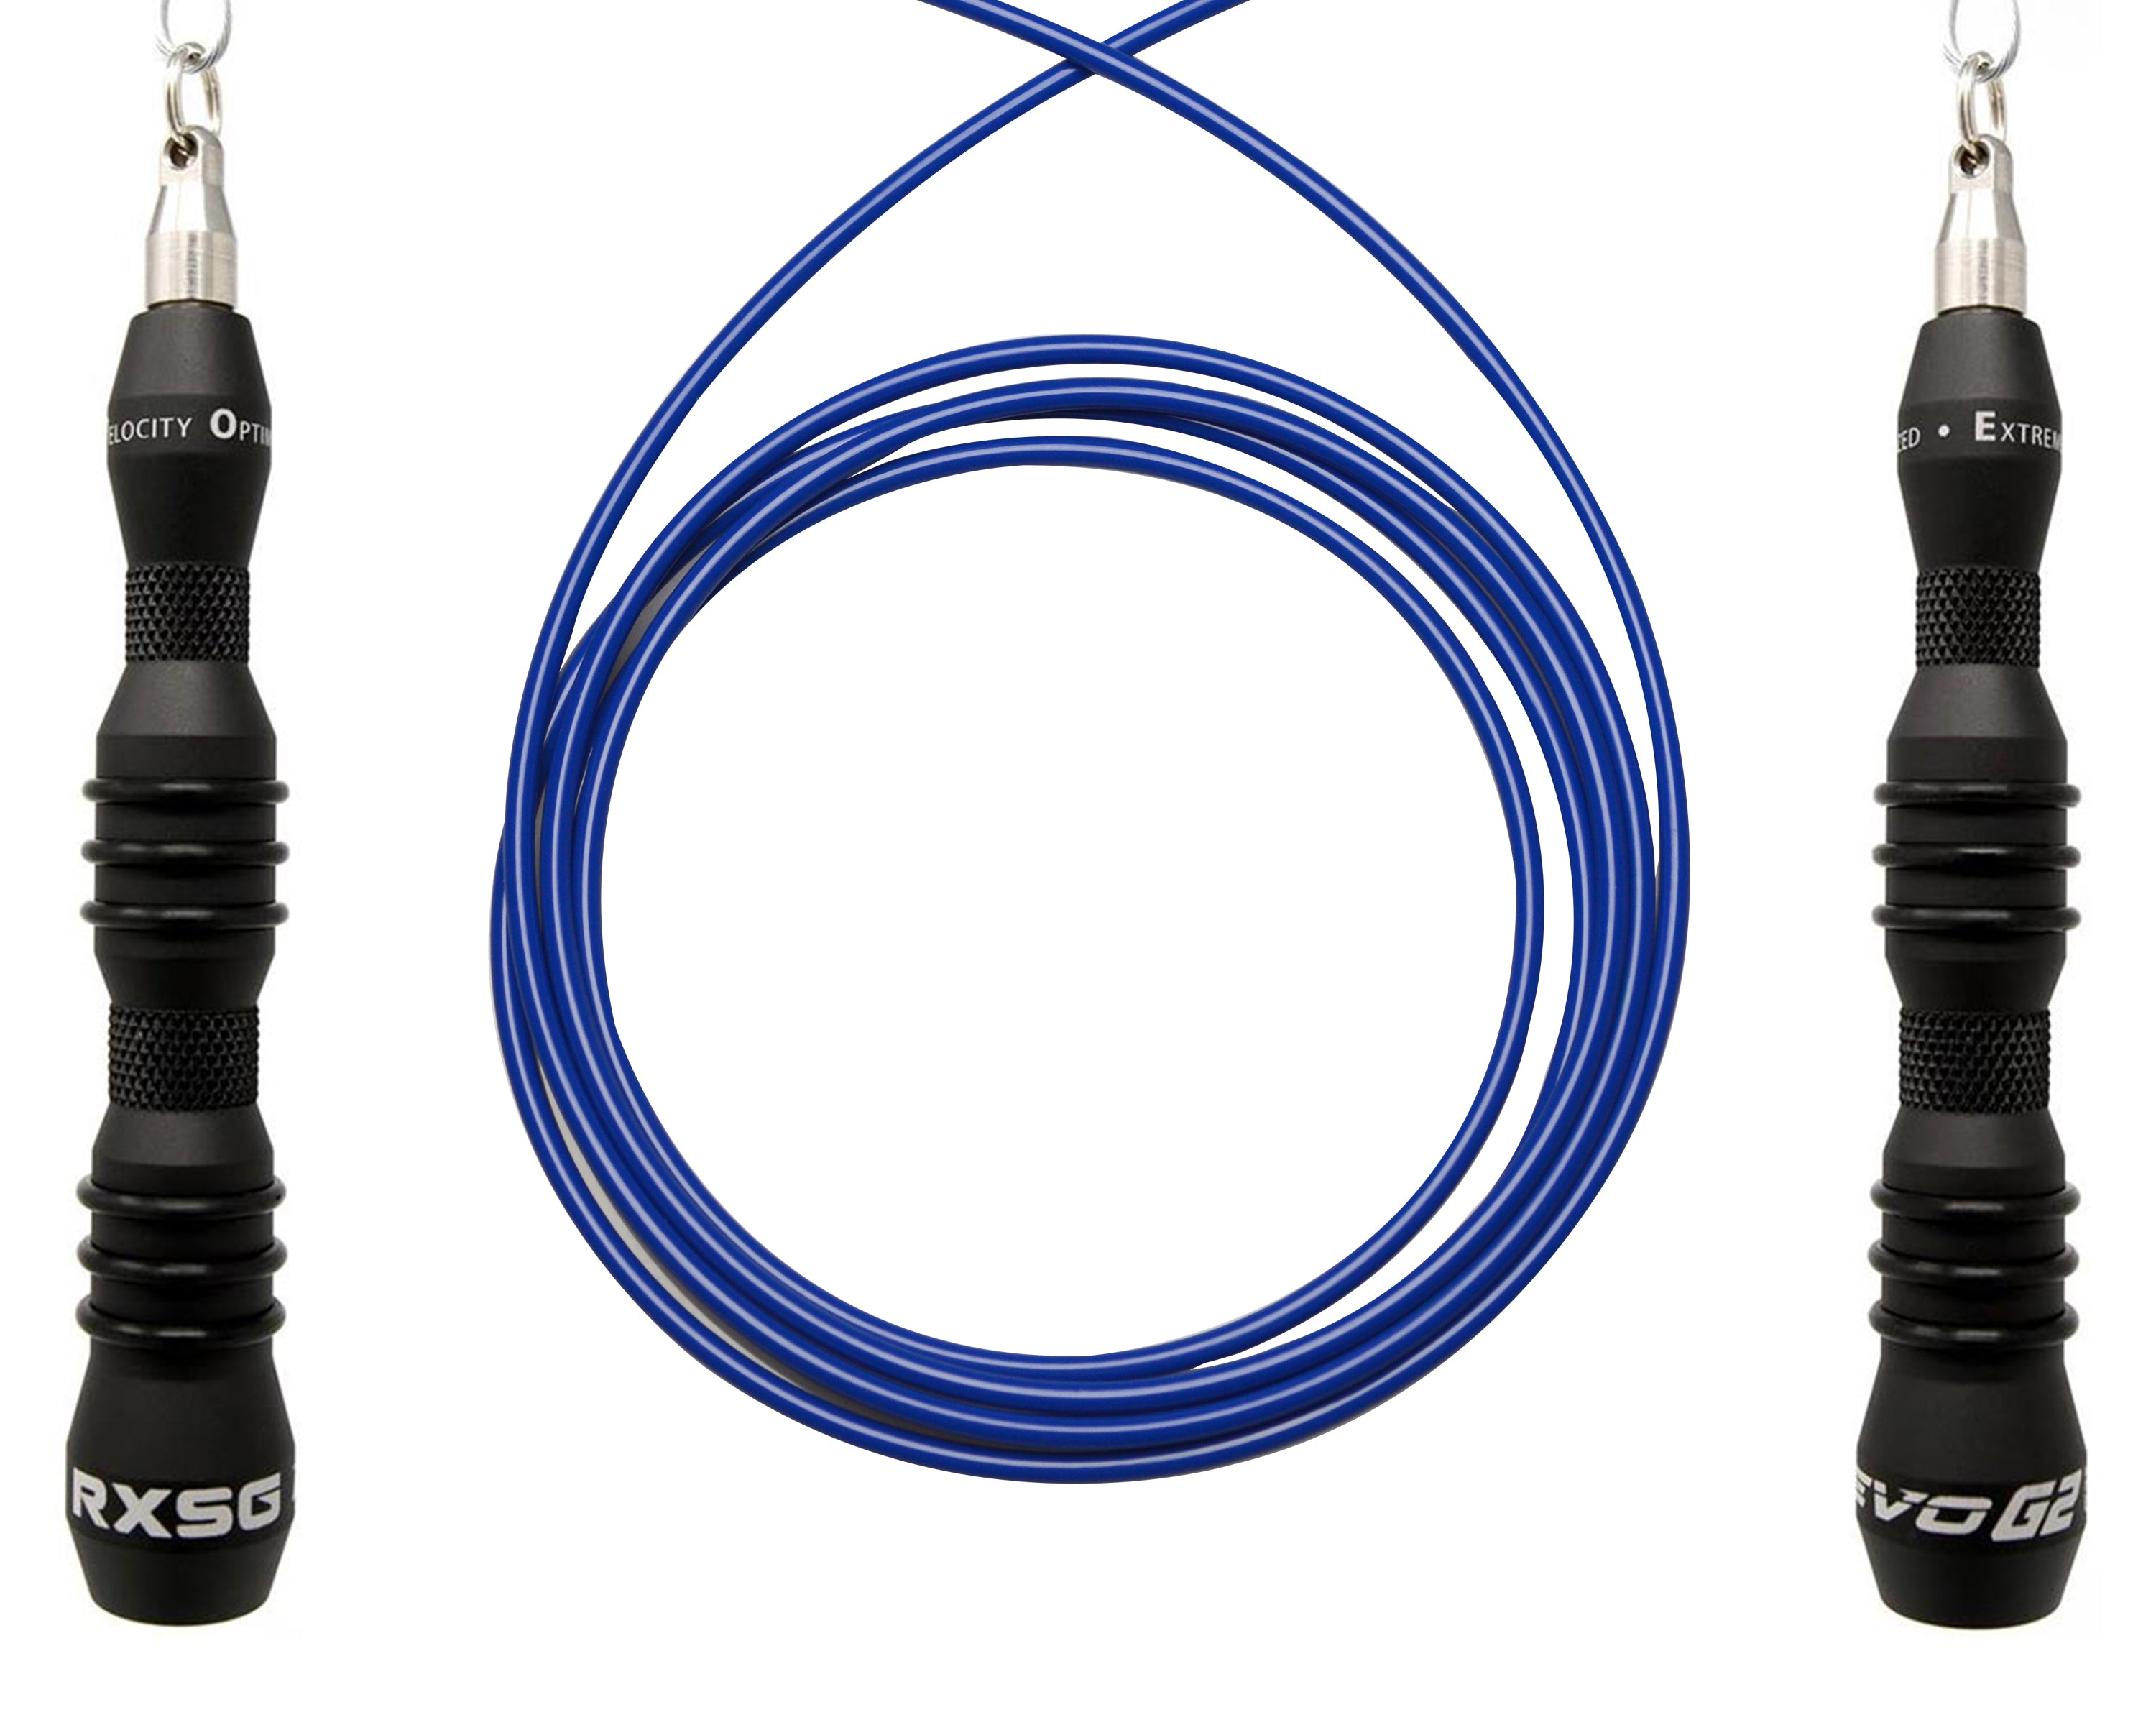 EVO G2 Speed Rope with Blue Cable